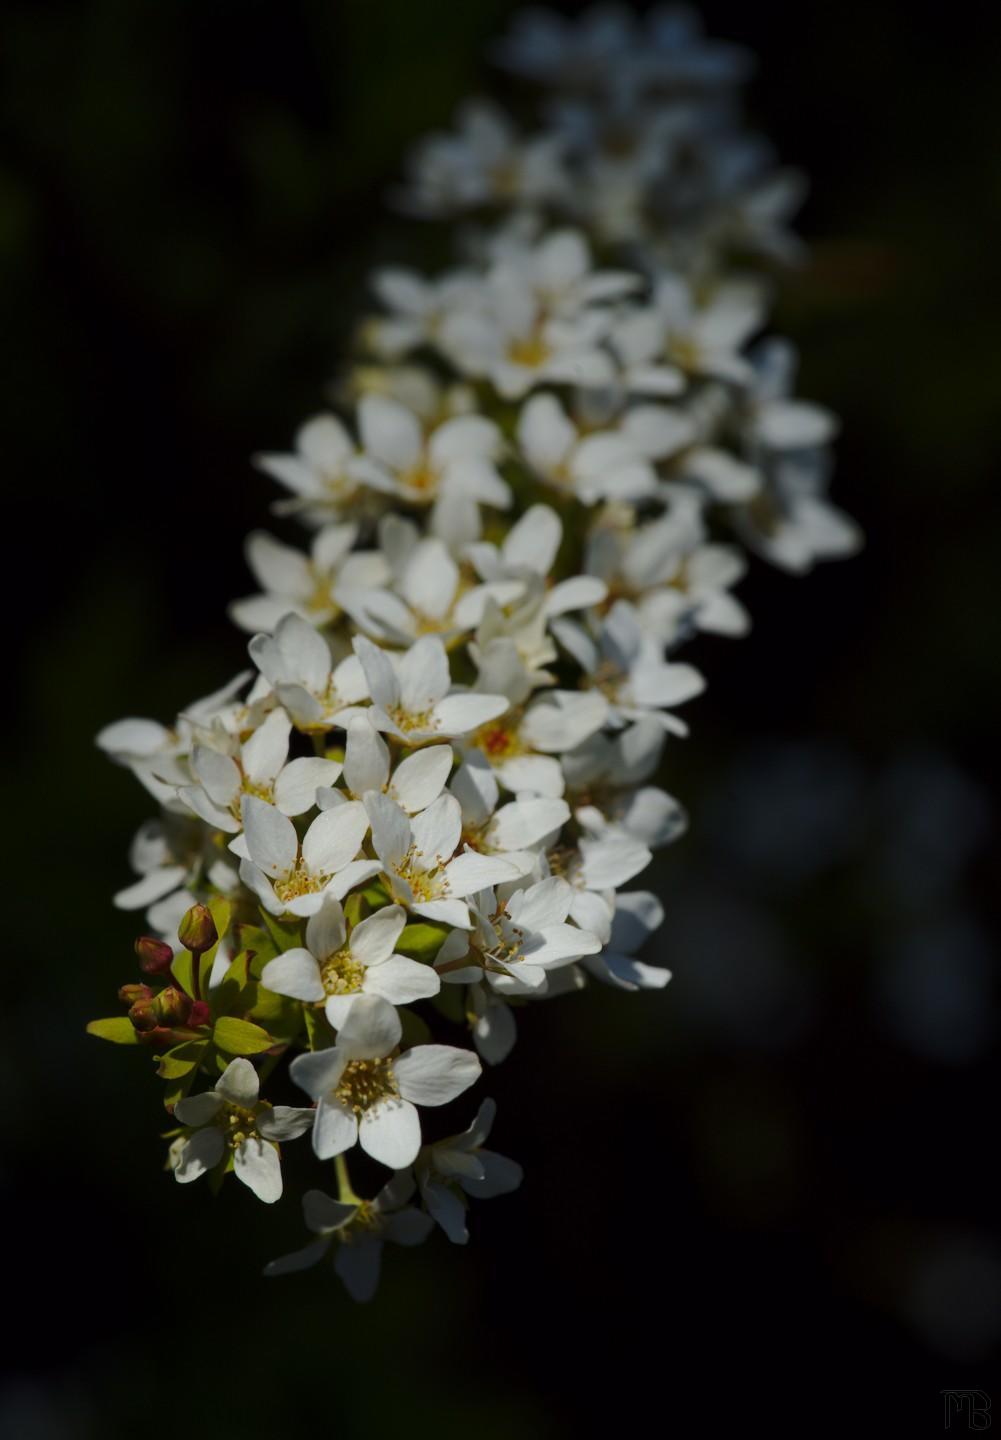 Shade on a branch of white flowers